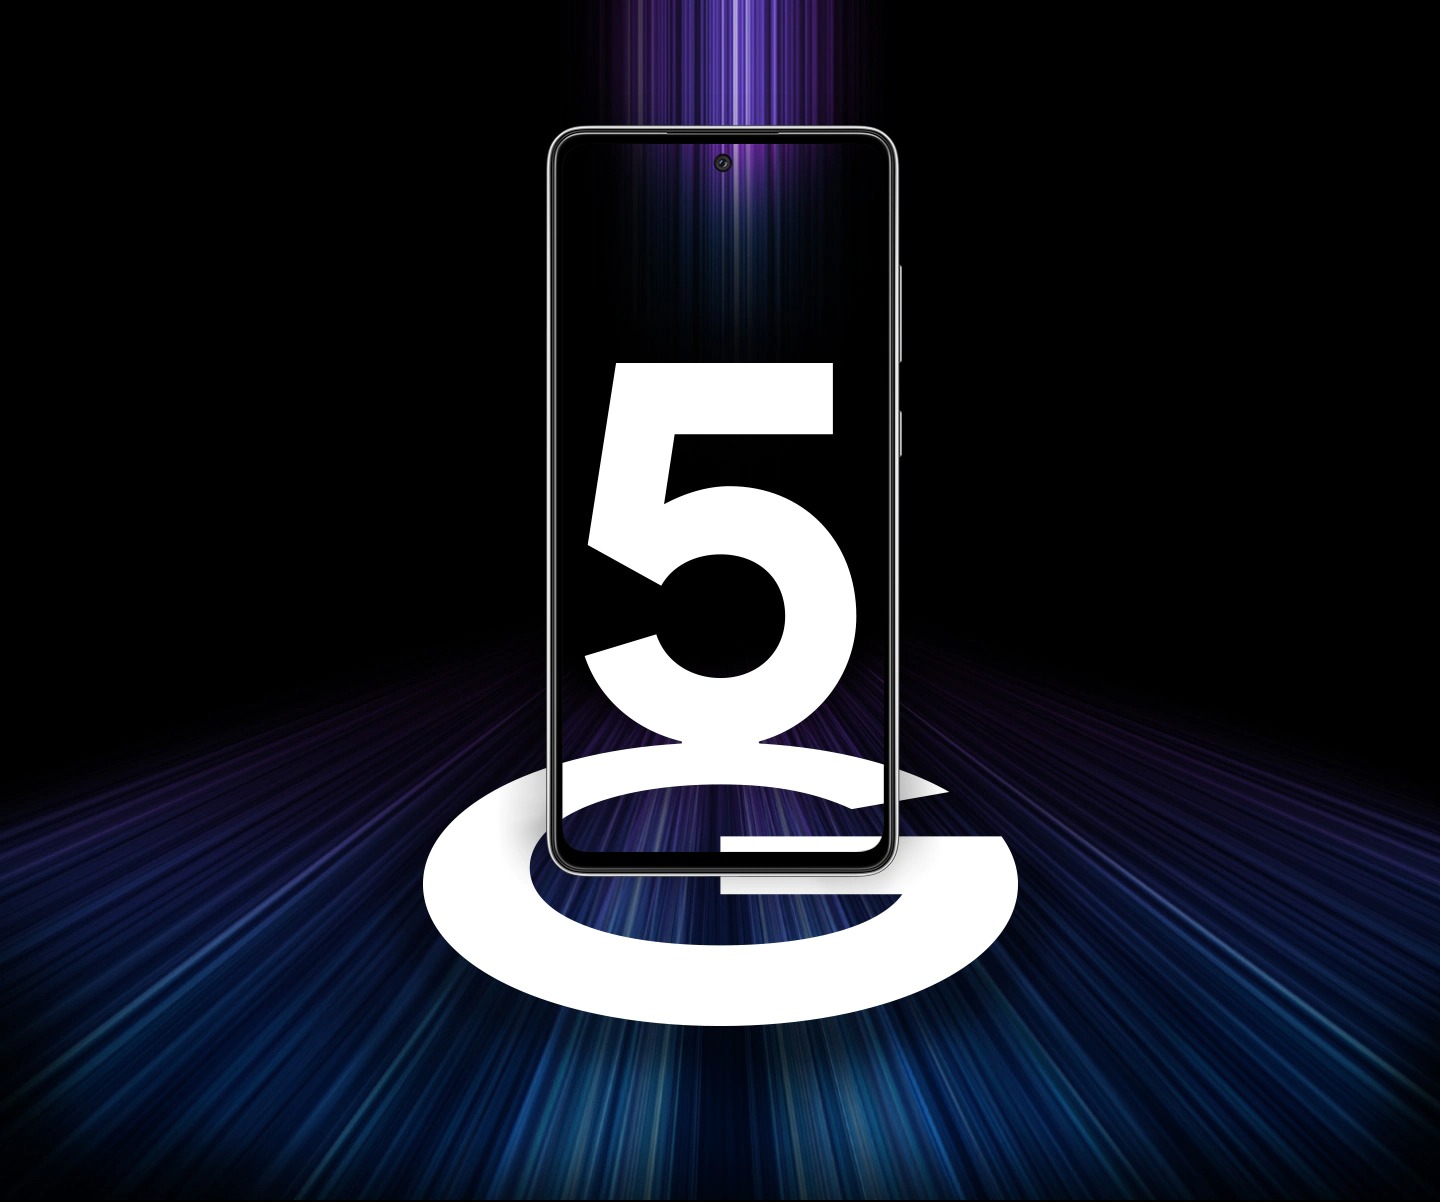 Awesome 5G, awesome ταχύτητα